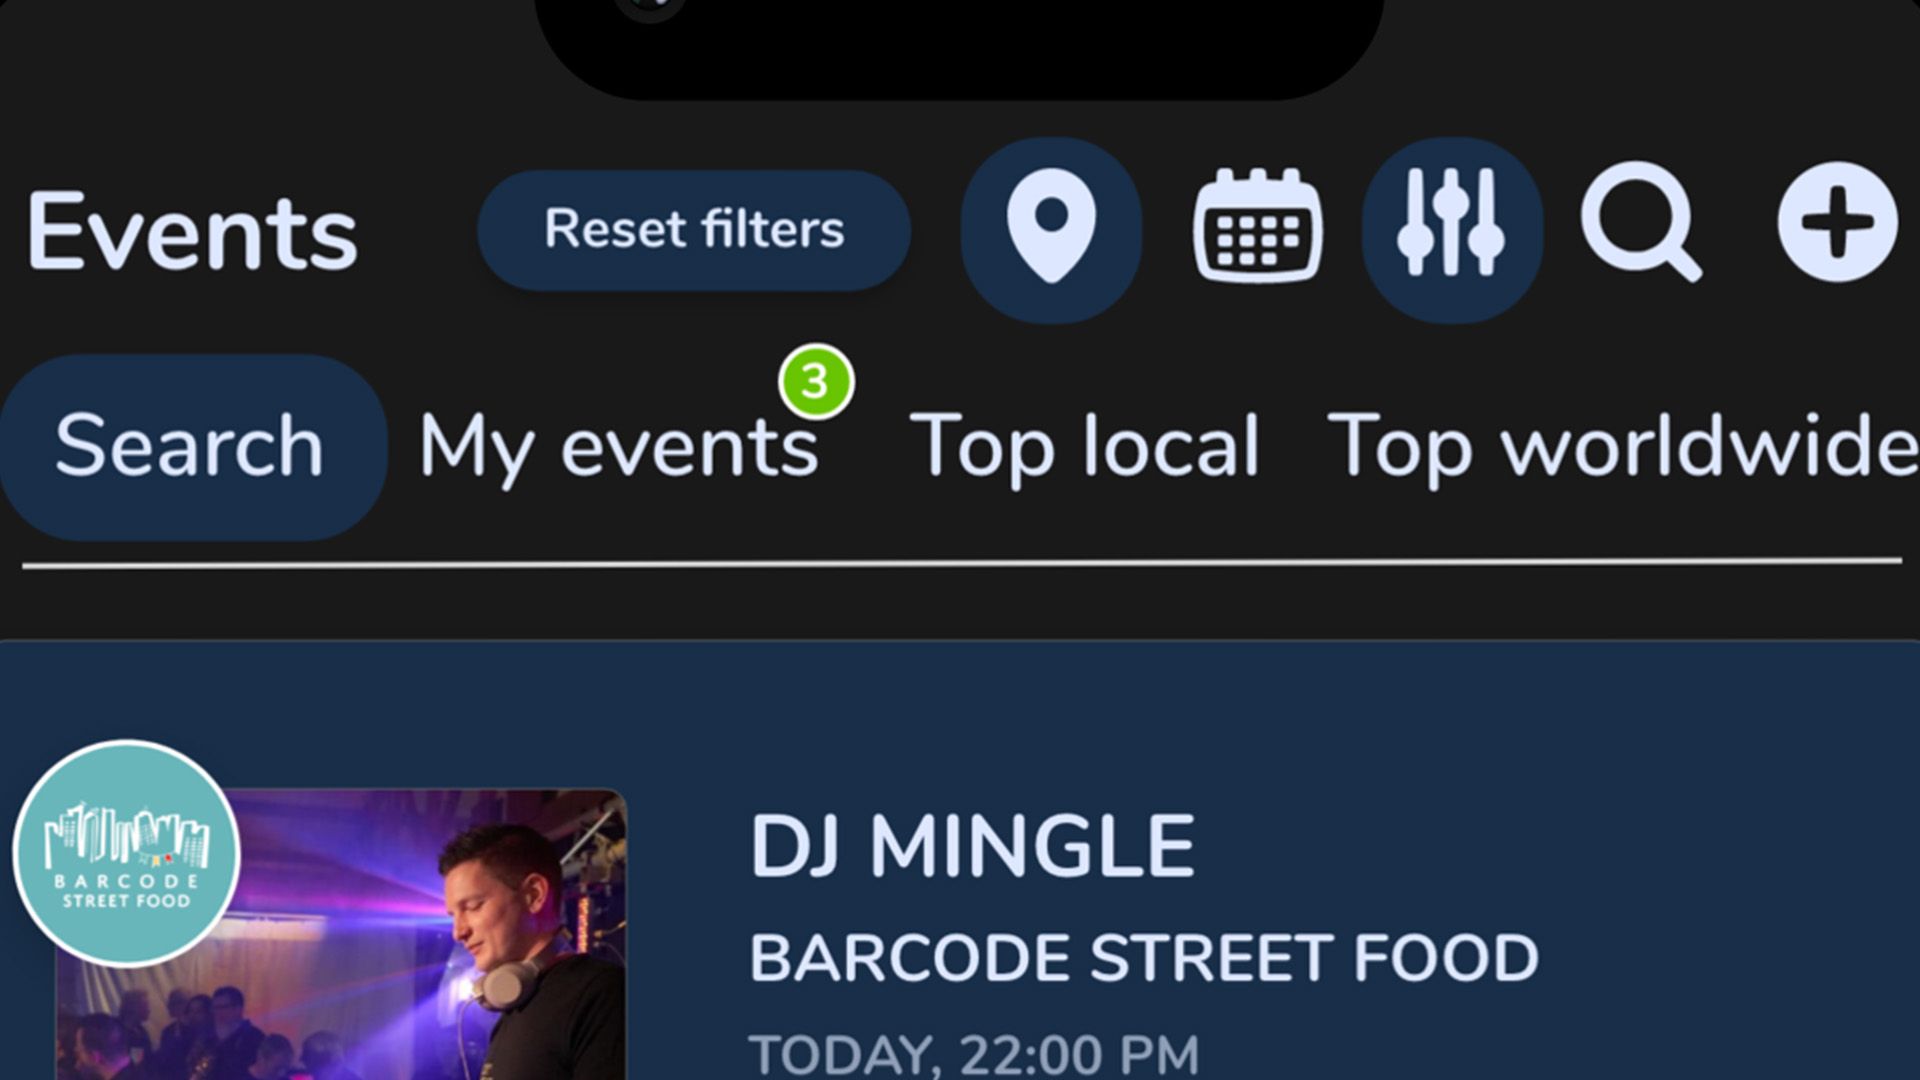 Cover Image for Event listing in the Join app is powered by Broadcast!